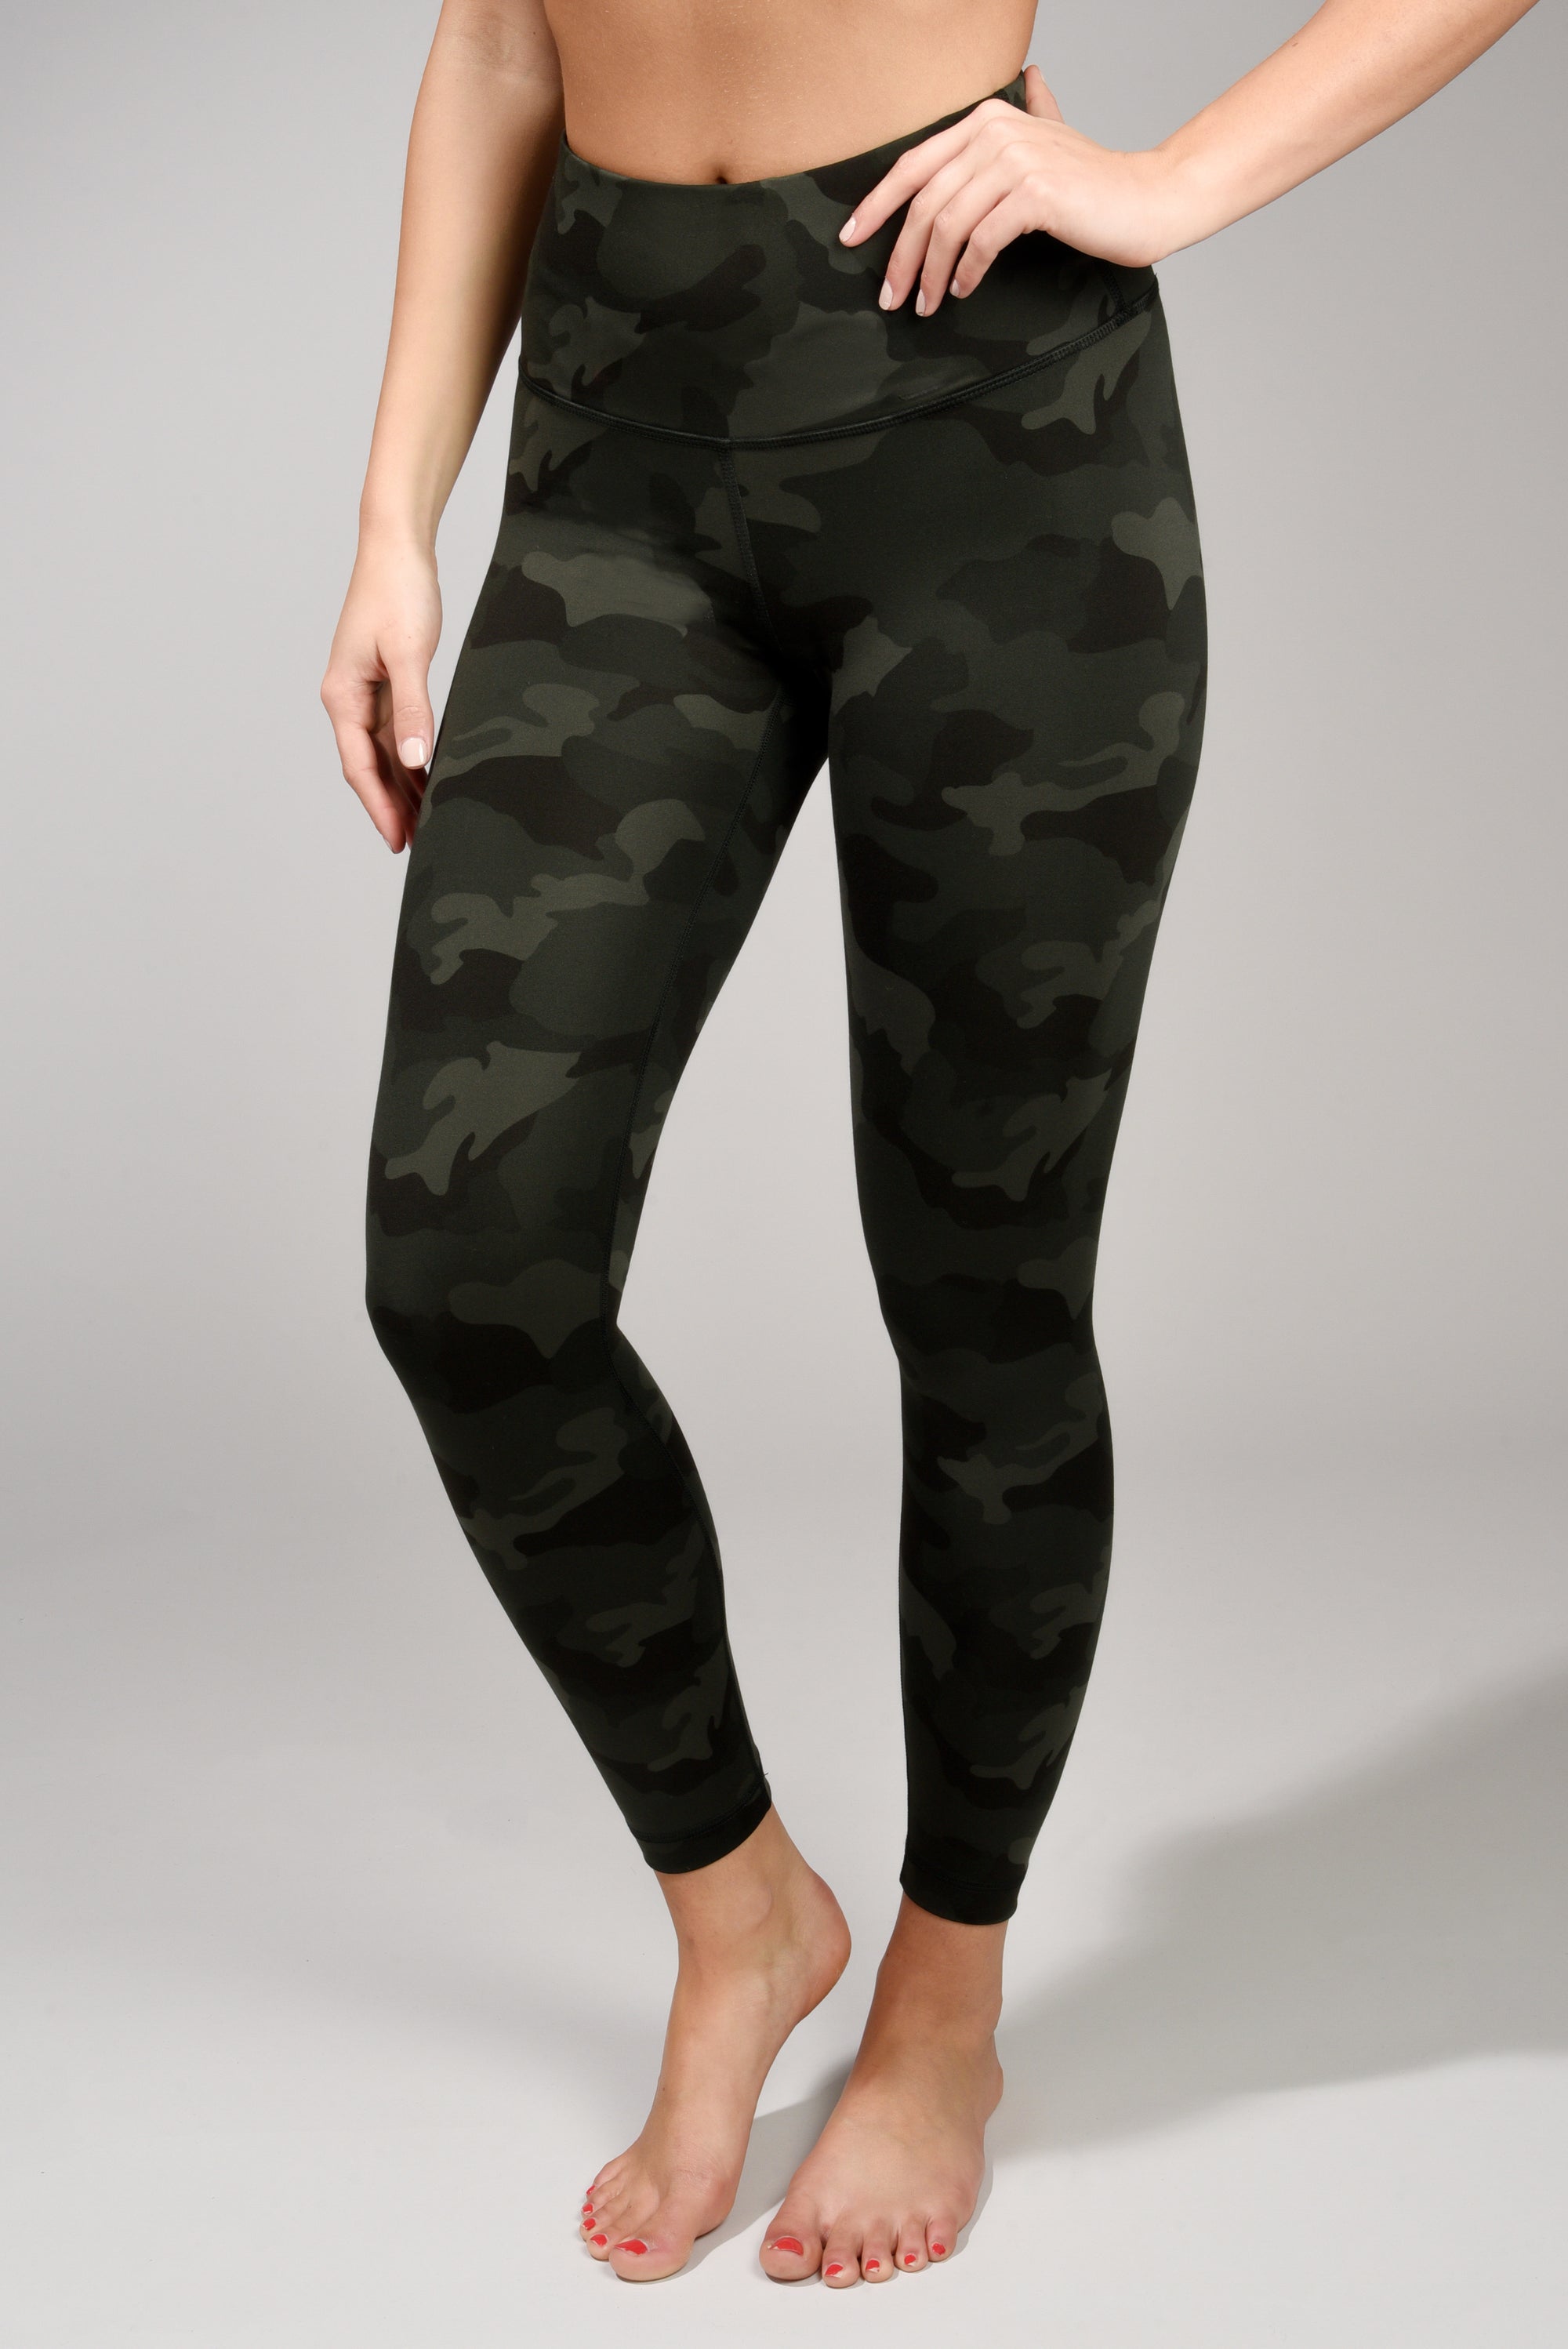 90 Degree by Reflex Leggings Womens Size Small Camo Print High Waisted NWT